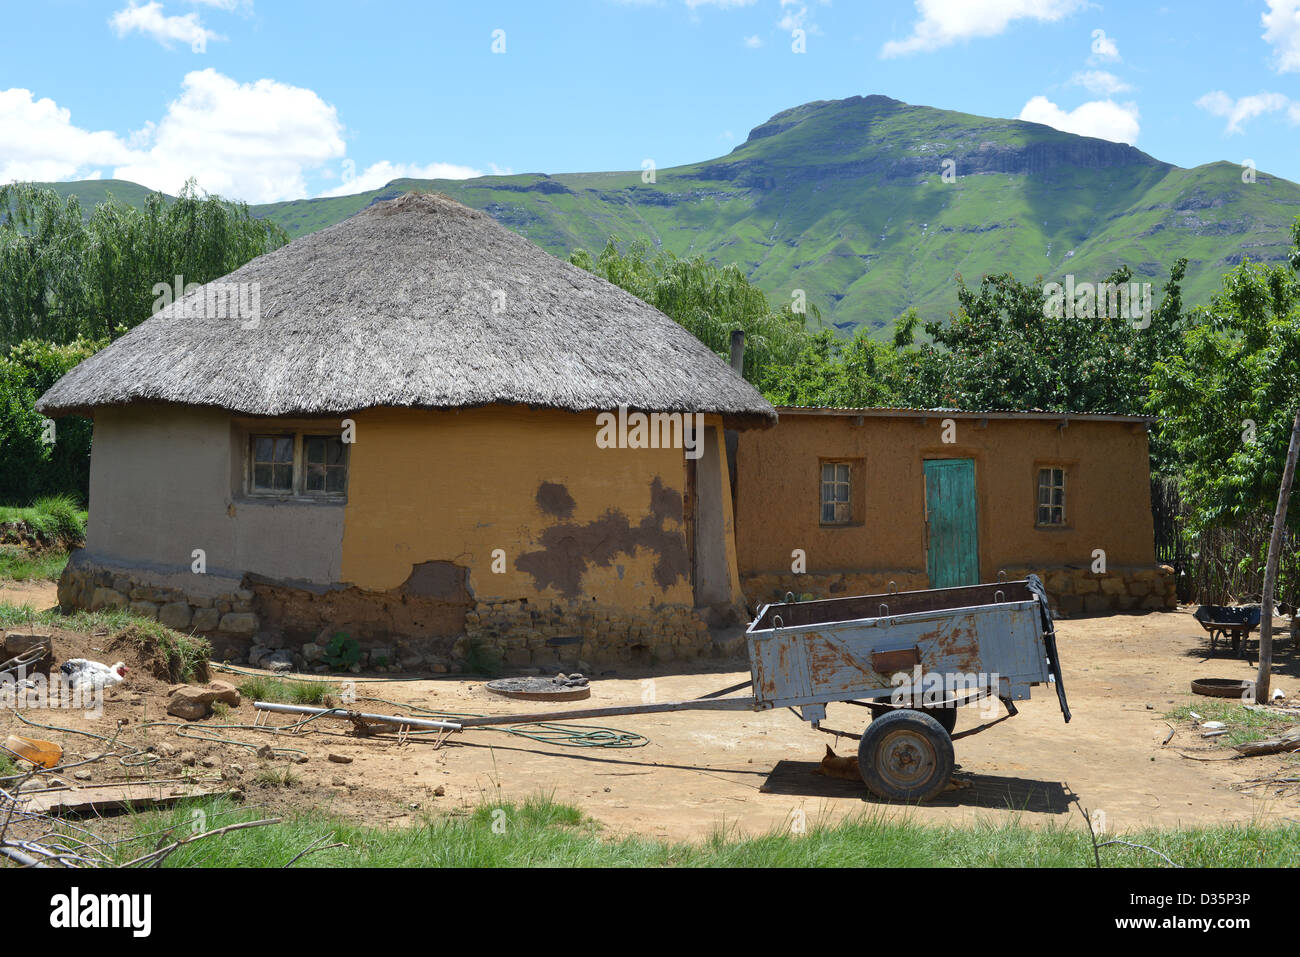 House in the hilly landscape of the Butha-Buthe region of Lesotho.. Stock Photo